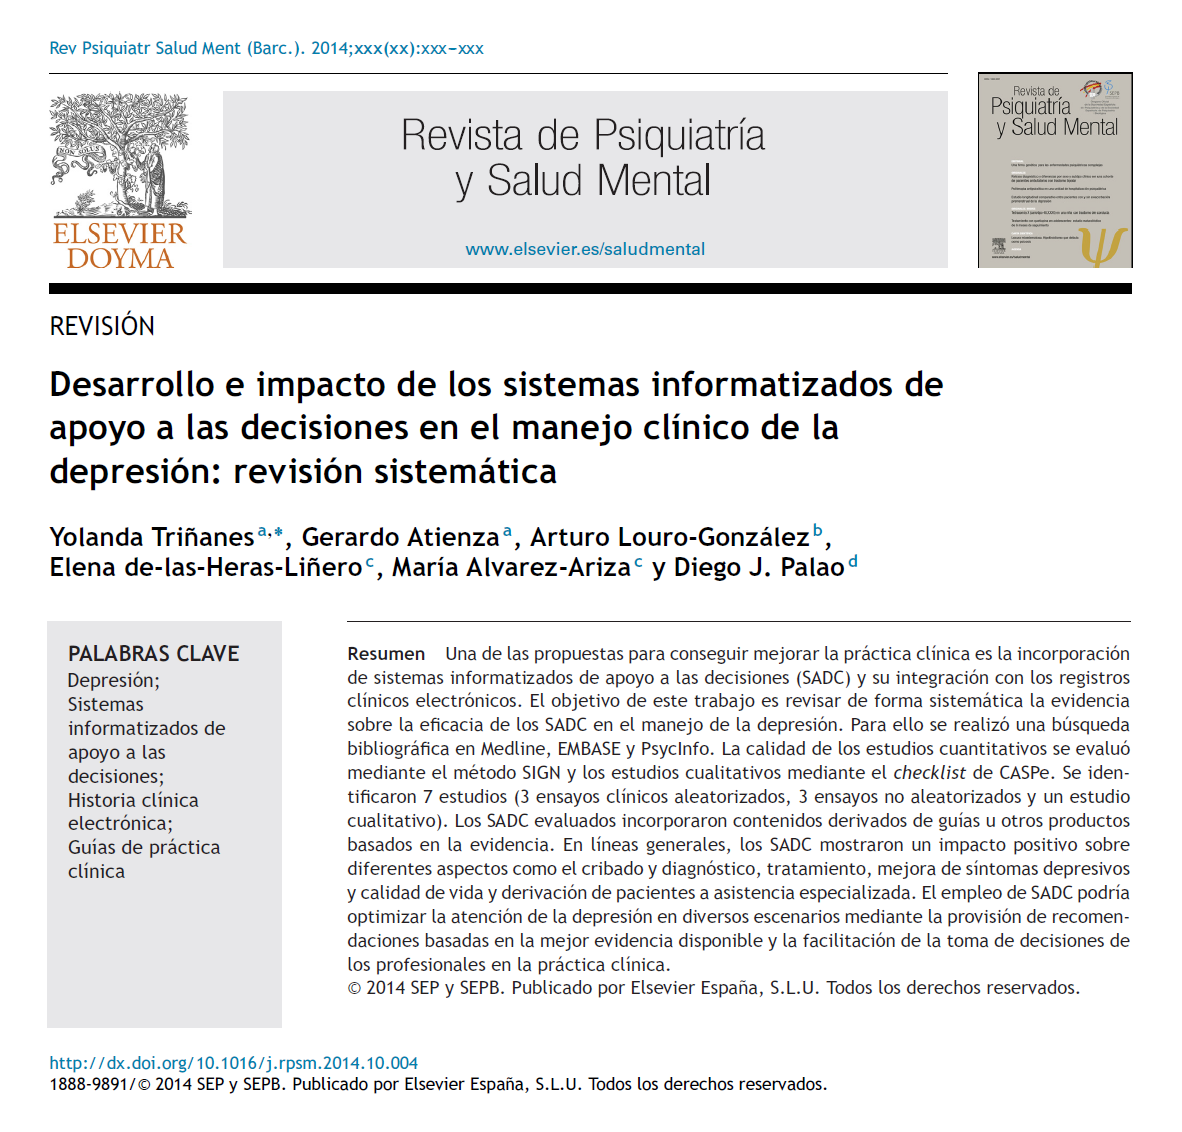 http://apps.elsevier.es/watermark/ctl_servlet?_f=10&pident_articulo=0&pident_usuario=0&pcontactid=&pident_revista=286&ty=0&accion=L&origen=zonadelectura&web=zl.elsevier.es&lan=es&fichero=S1888-9891(14)00145-1.pdf&eop=1&early=si